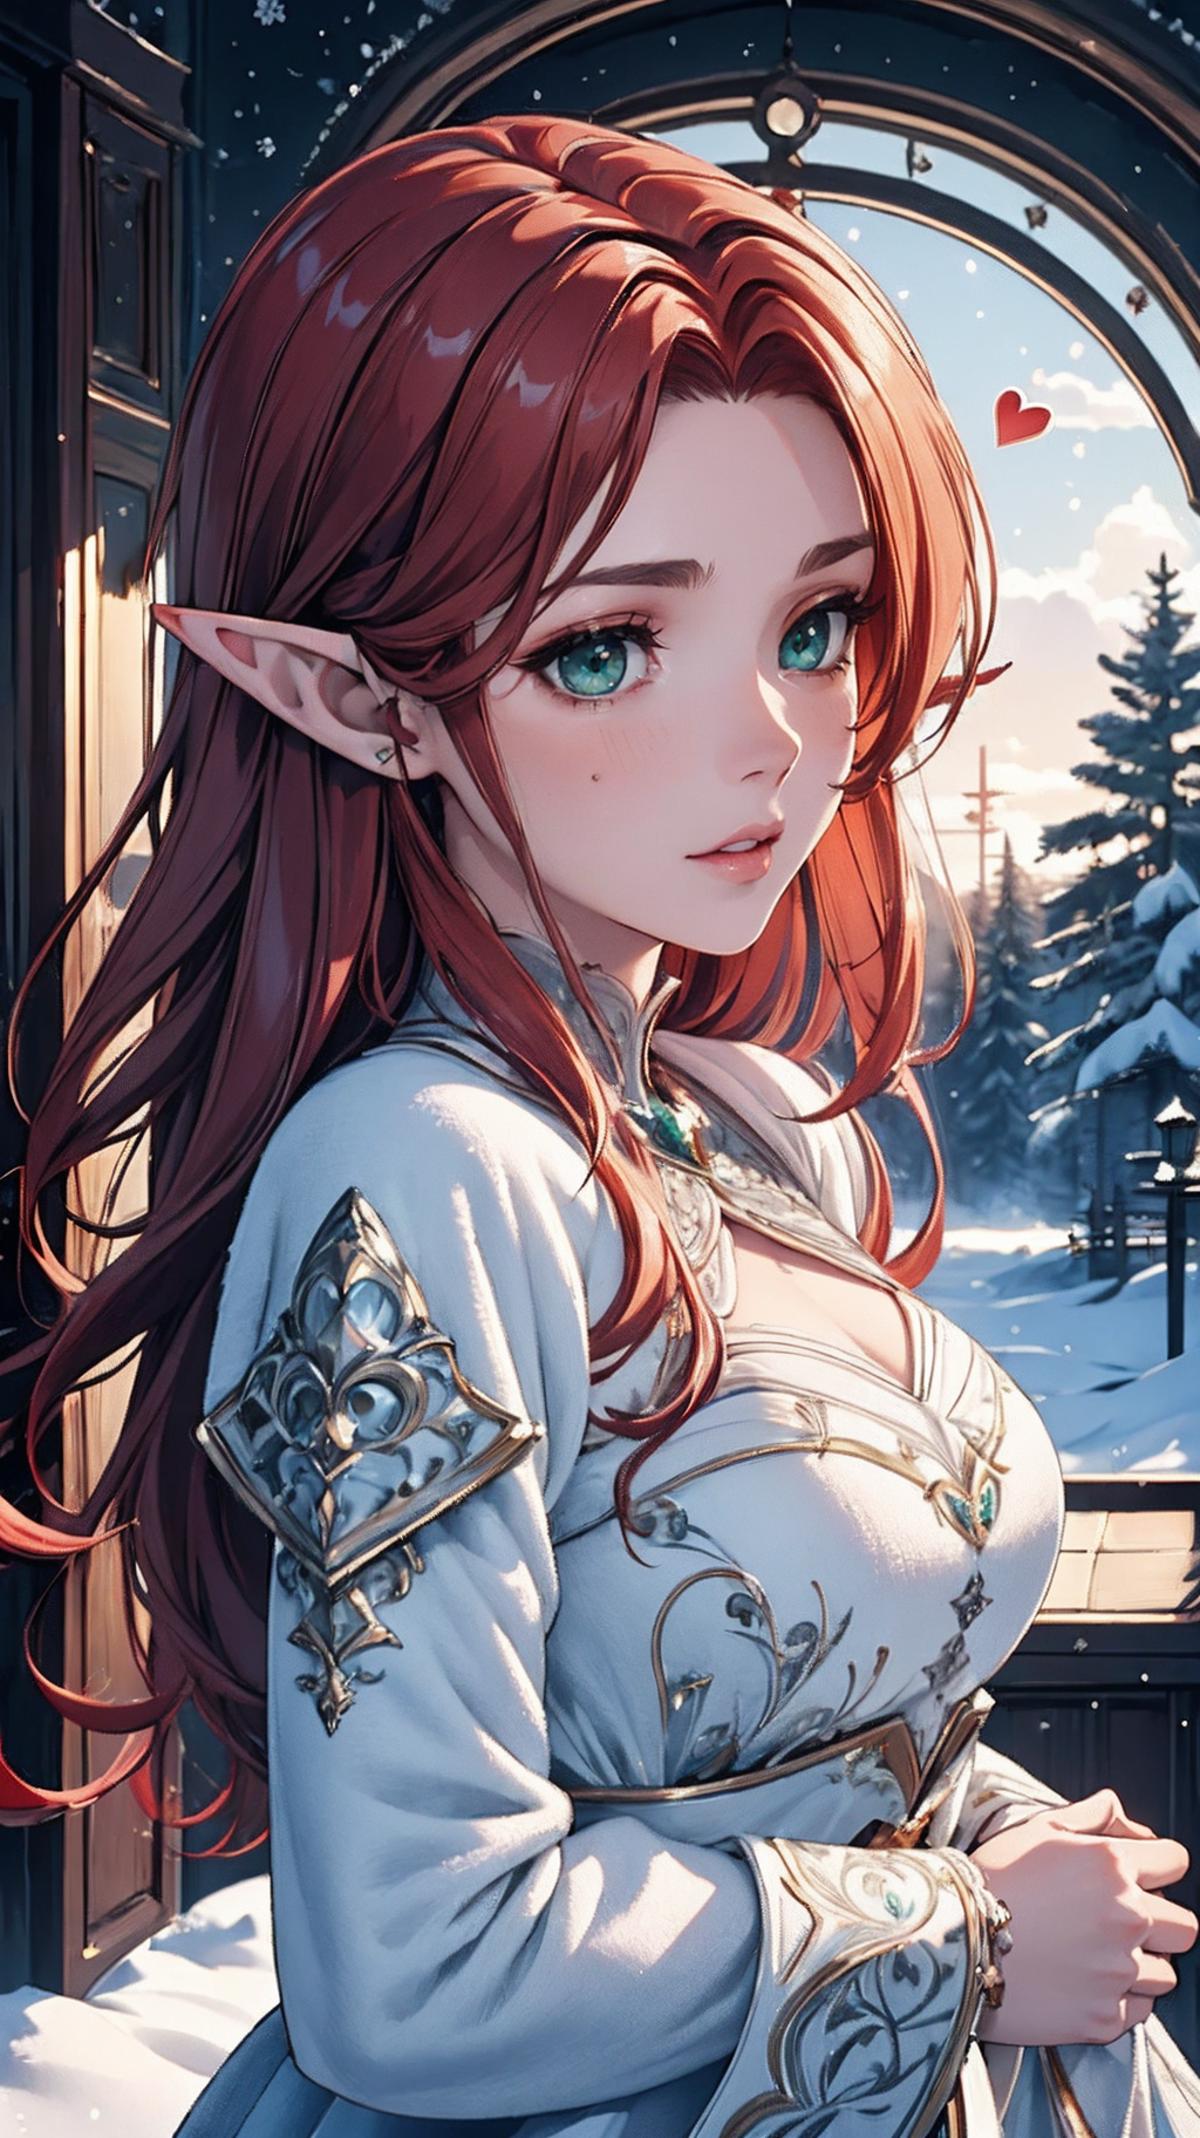 A pretty young girl with red hair wearing a white dress and elven ears.